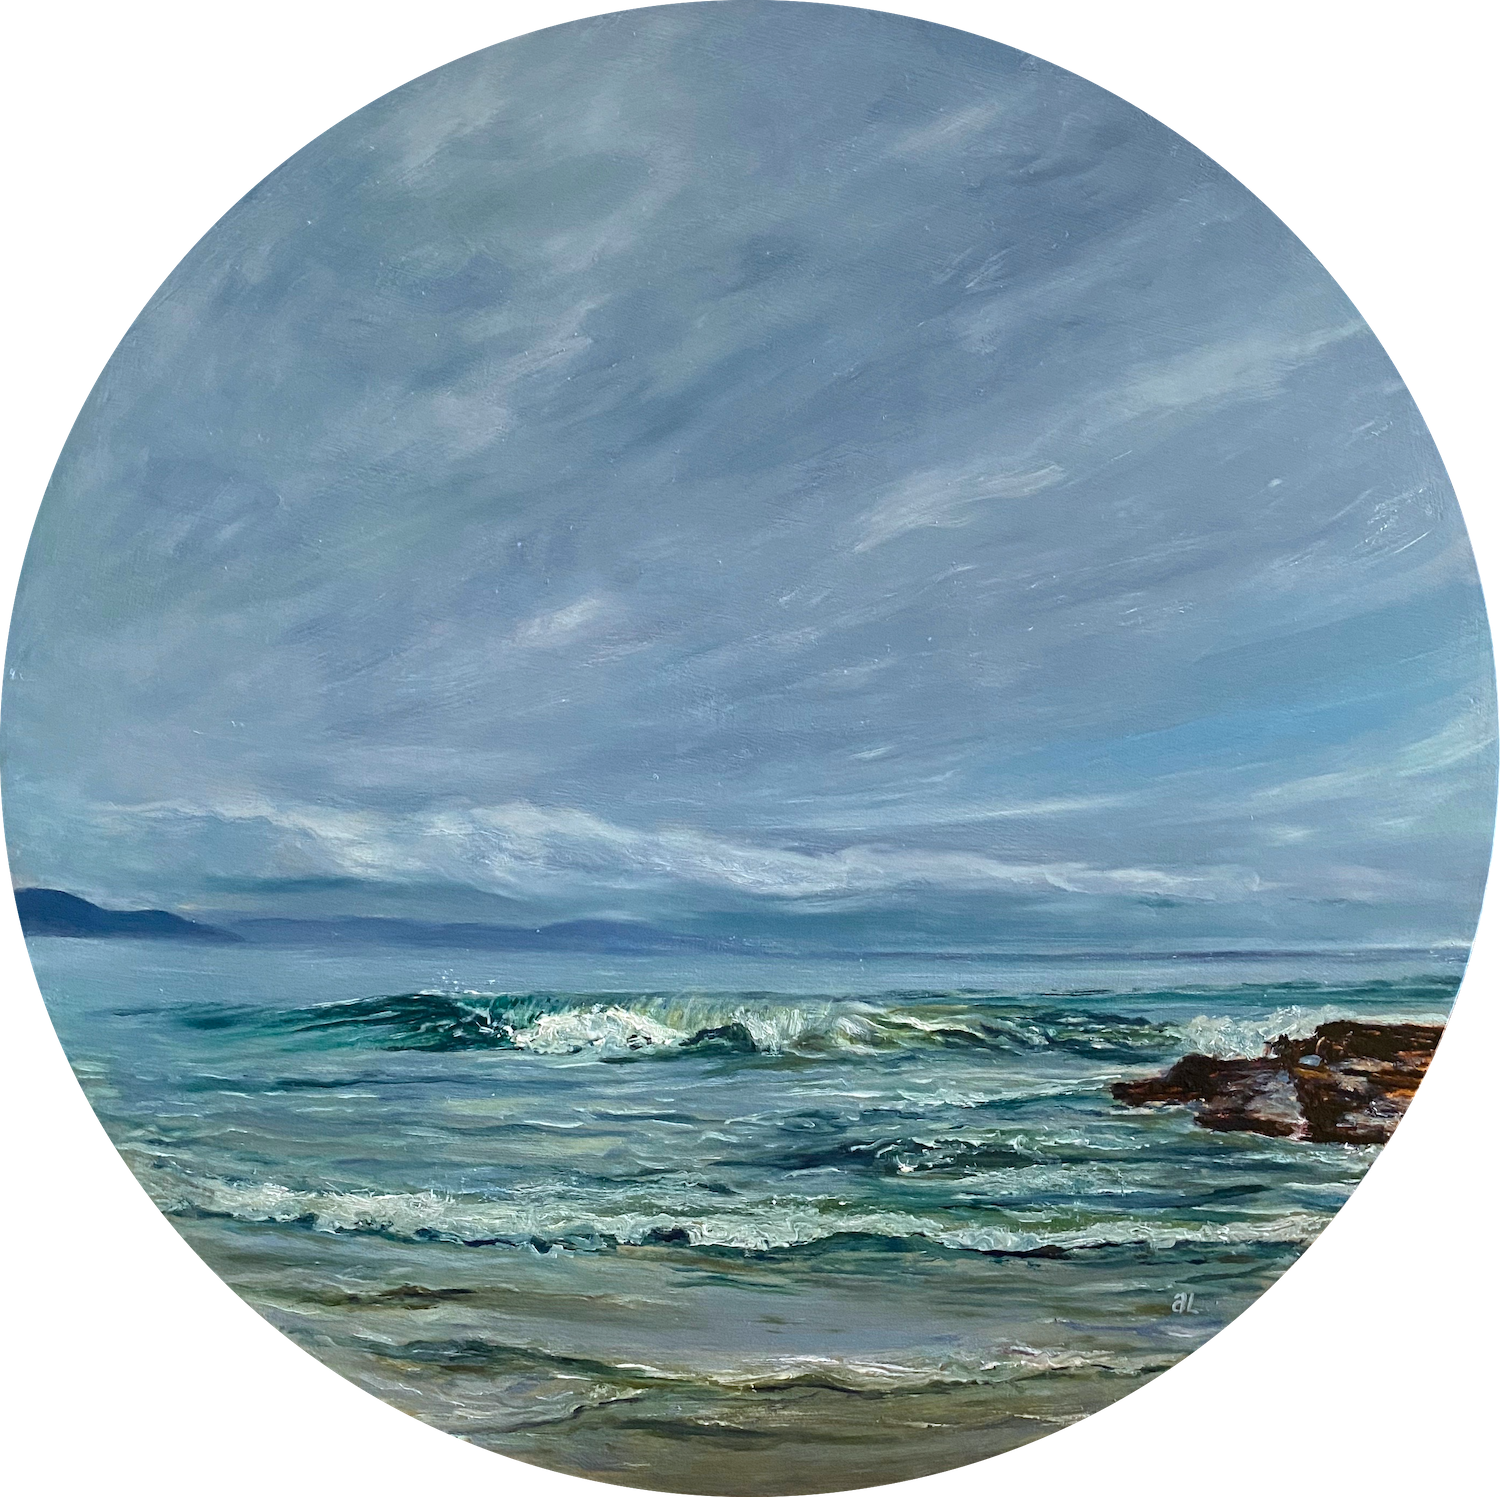 Averill Lawler - Where the Land and Sea Entwine, Calverts Beach, Storm Bay